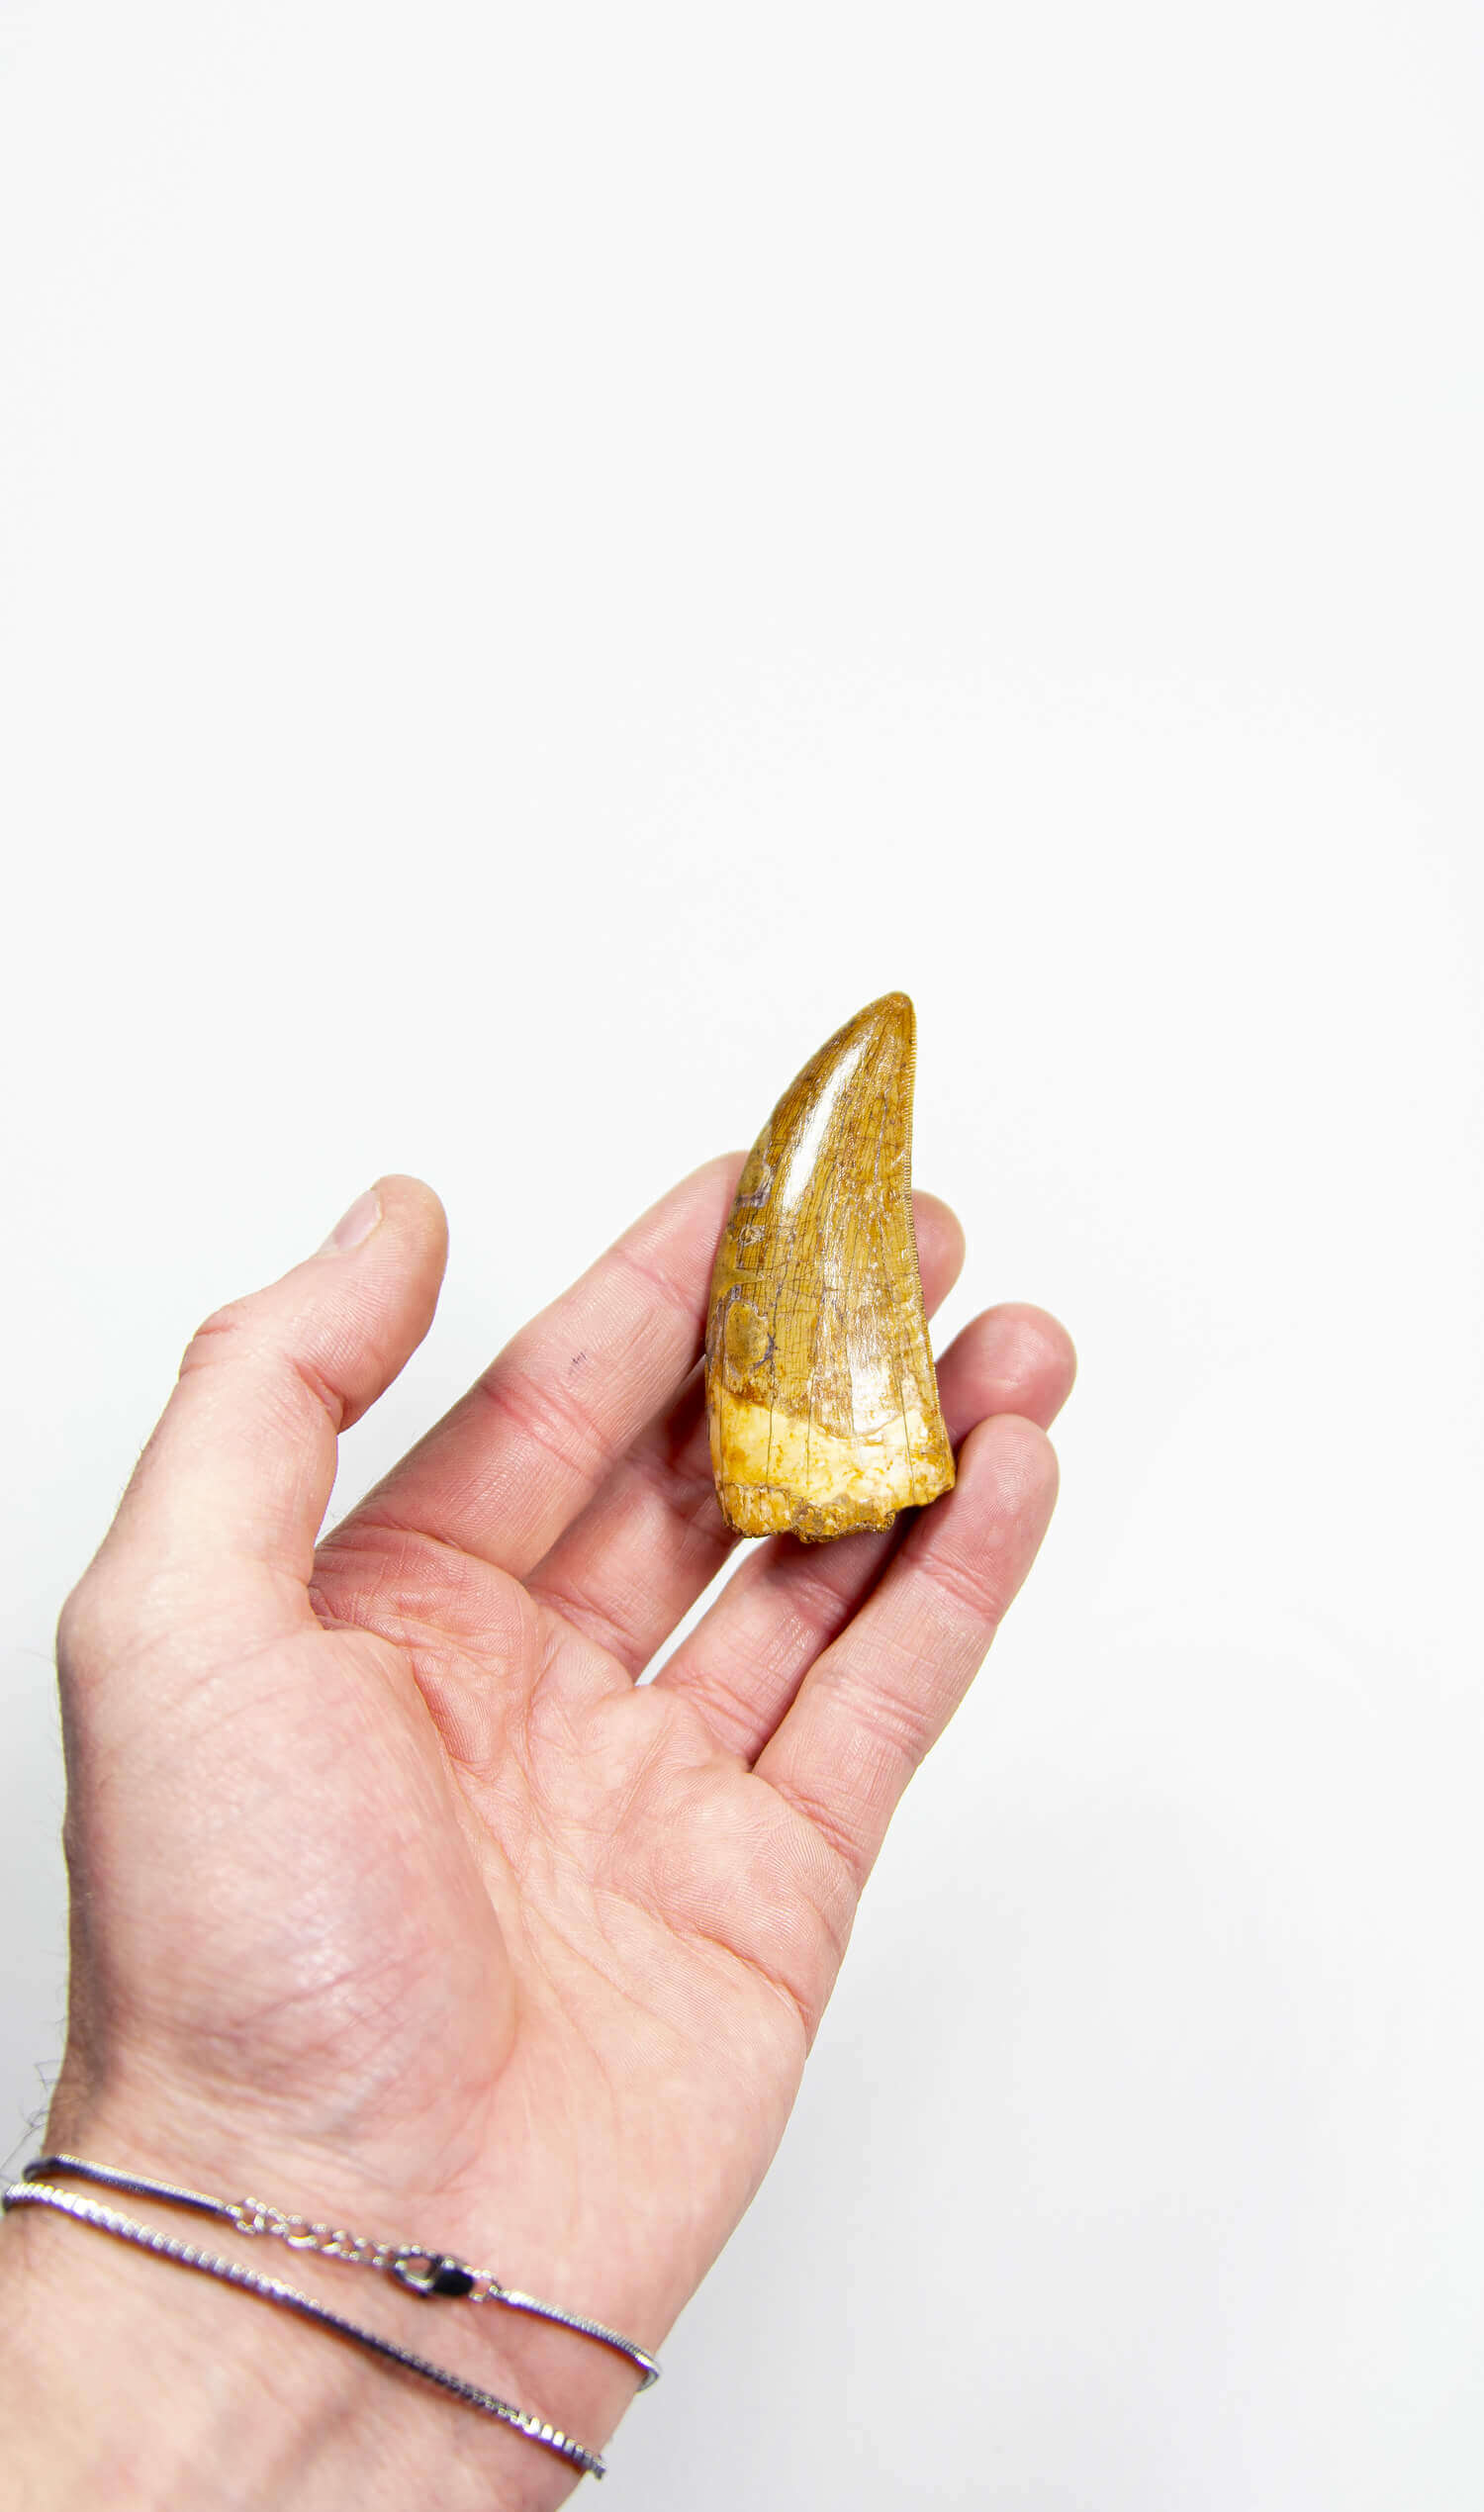 real fossil dinosaur carcharodontosaurus tooth for sale at the uk fossil store 44